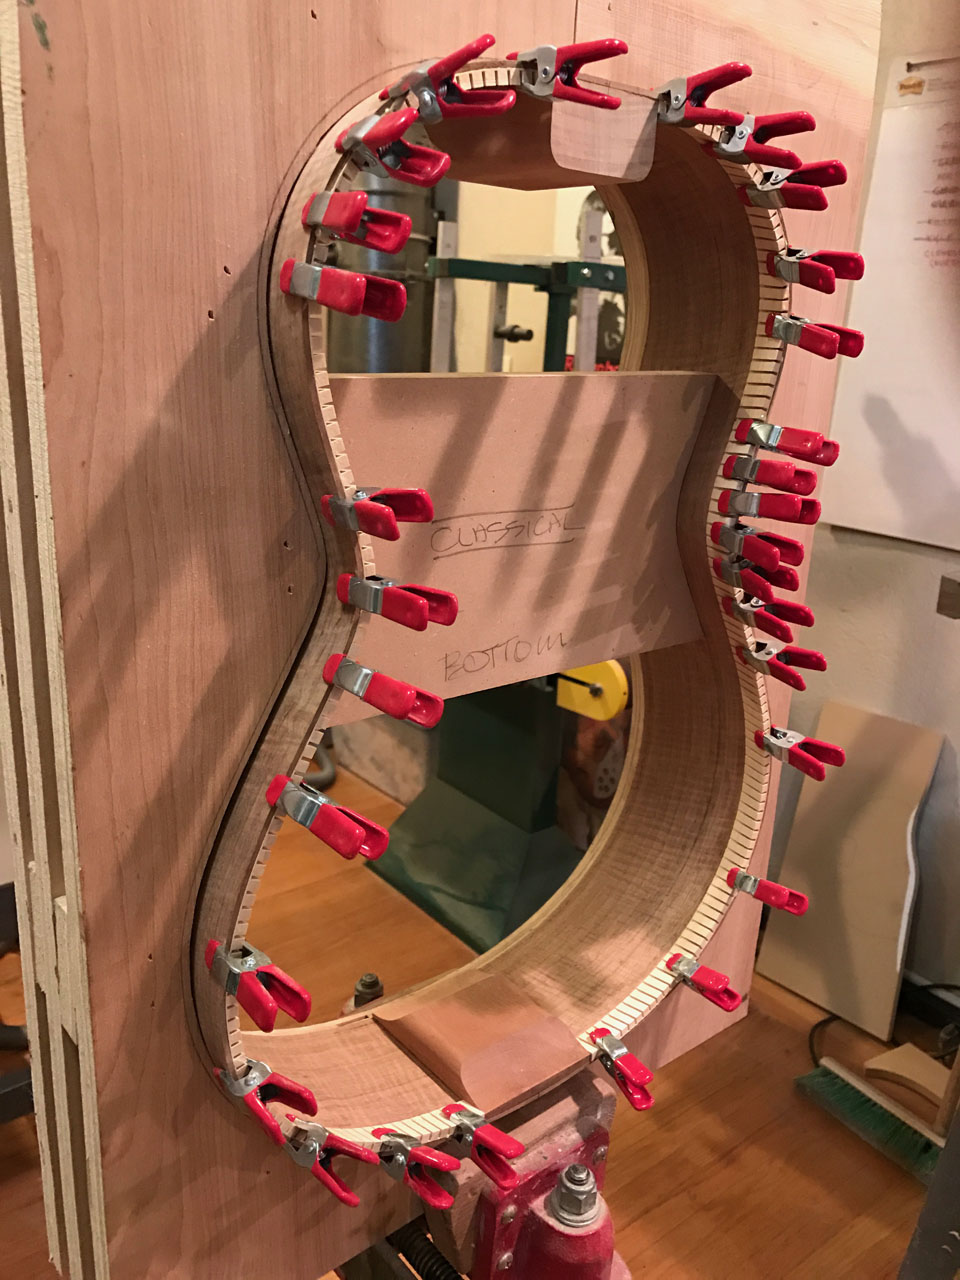 THE CLASSICAL "HOOP" IS HAVING ITS LINING STRIPS GLUED INTO PLACE. THESE PROVIDE A SURFACE ONTO WHICH THE TOP AND BACK ARE GLUED.